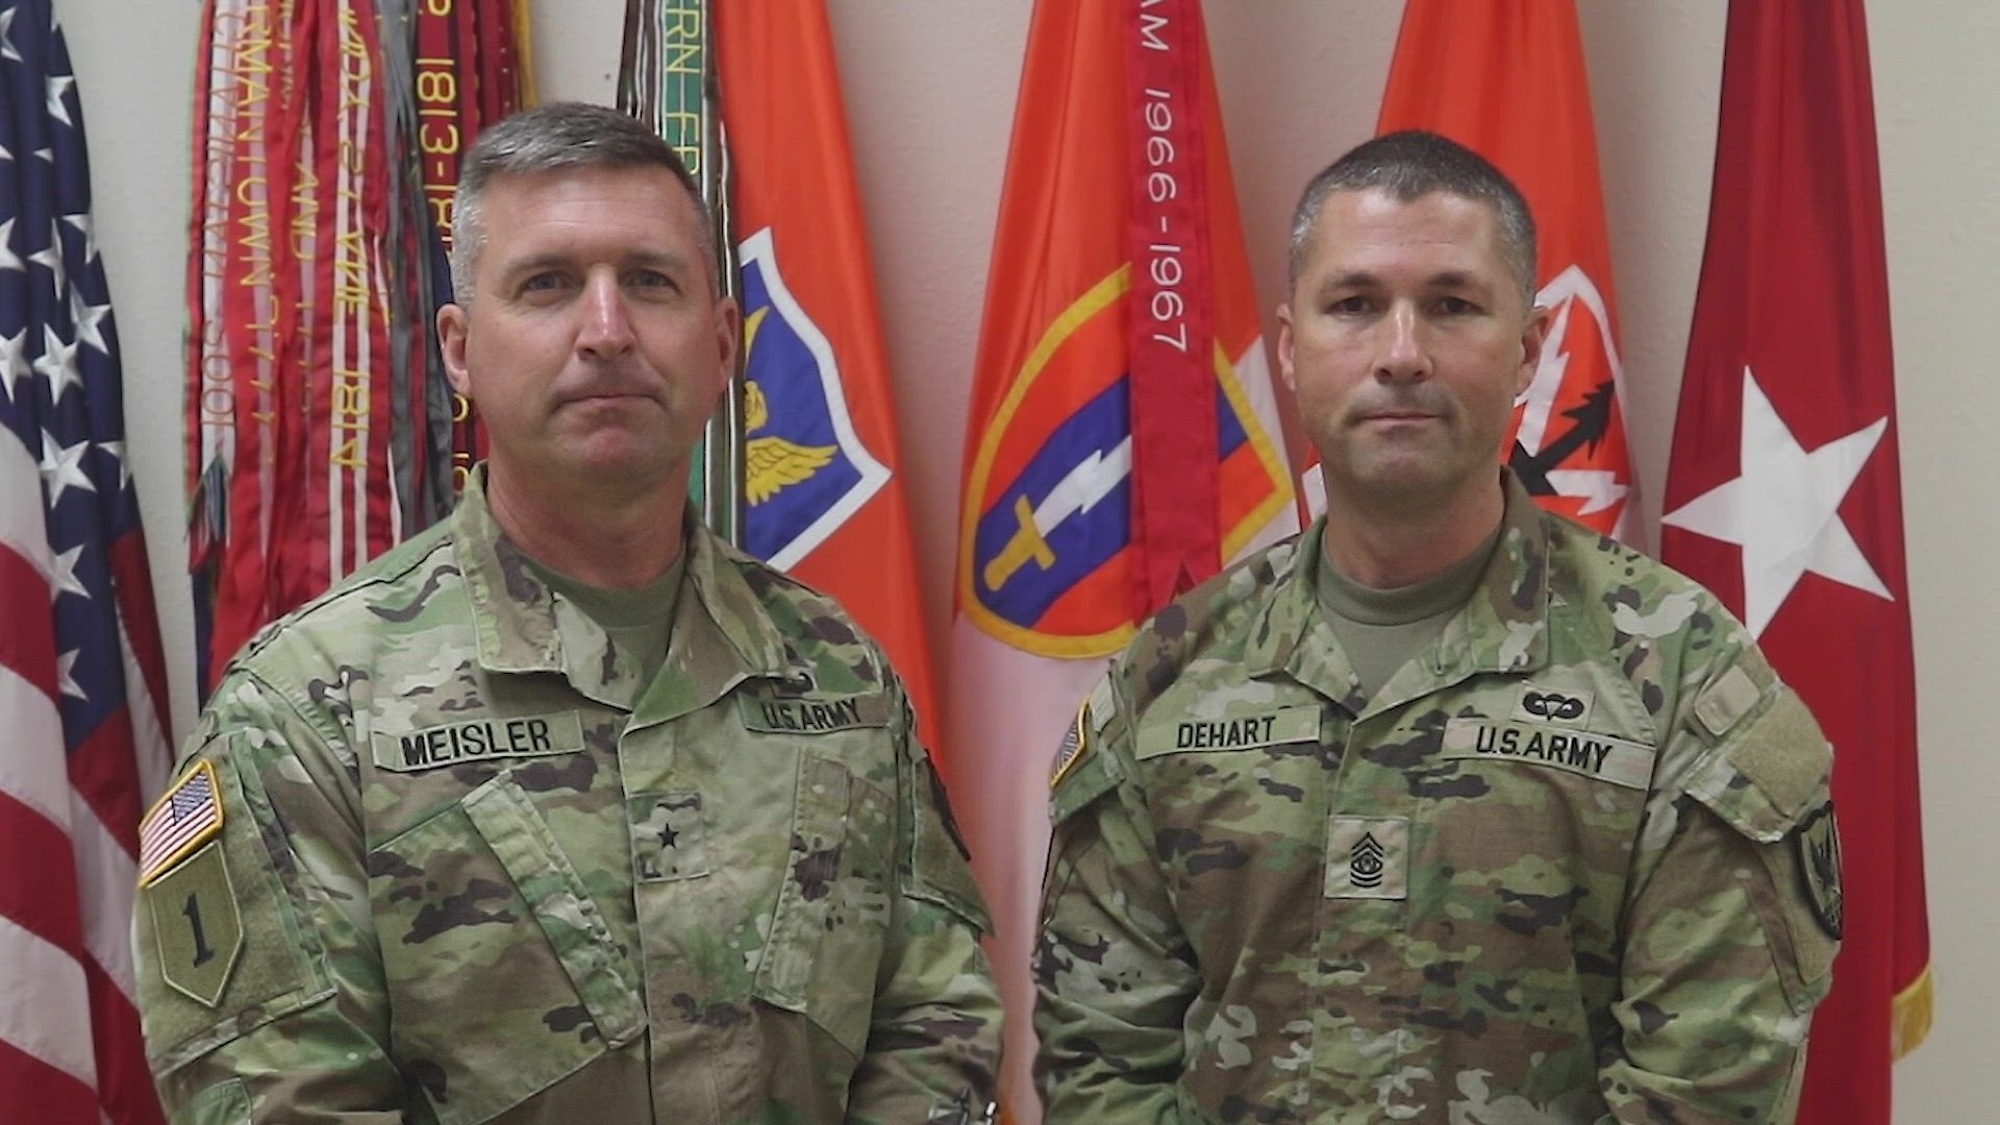 U.S. Army Brig. Gen. Kevin Meisler and Command Sgt. Maj. Jonathan DeHart of the 311th Signal Command (Theater) greet signal and cyber Soldiers across the Pacific from Fort Shafter, HI., on Sept. 7, 2022 (U.S. Army video by Sfc. Ron Keenan)